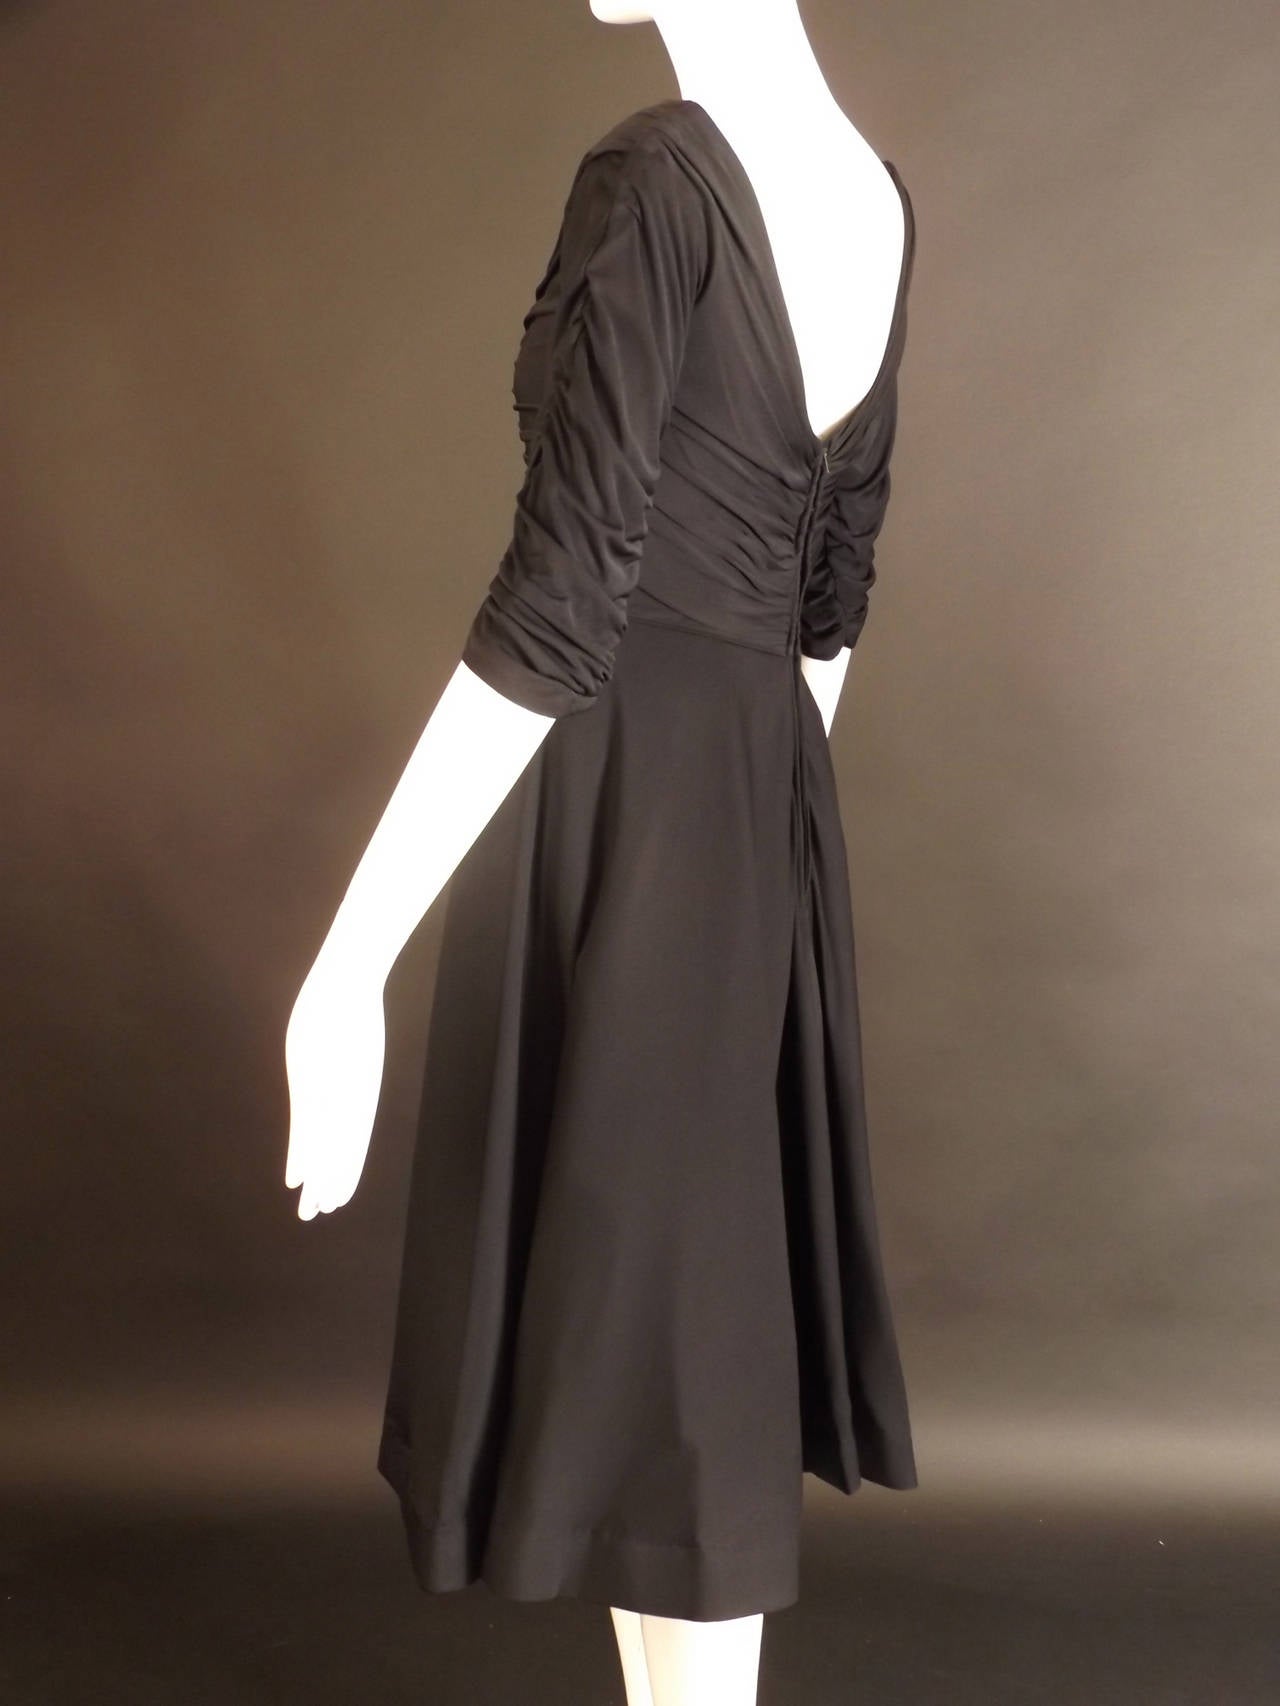 Gorgeous 1950s dinner dress in a black silk jersey knit. The dress has a scoop neckline with shirring on the shoulders and down the side seams, draping the fabric across the body. 3/4 Set in sleeves are also shirred down the seams.  The skirt falls